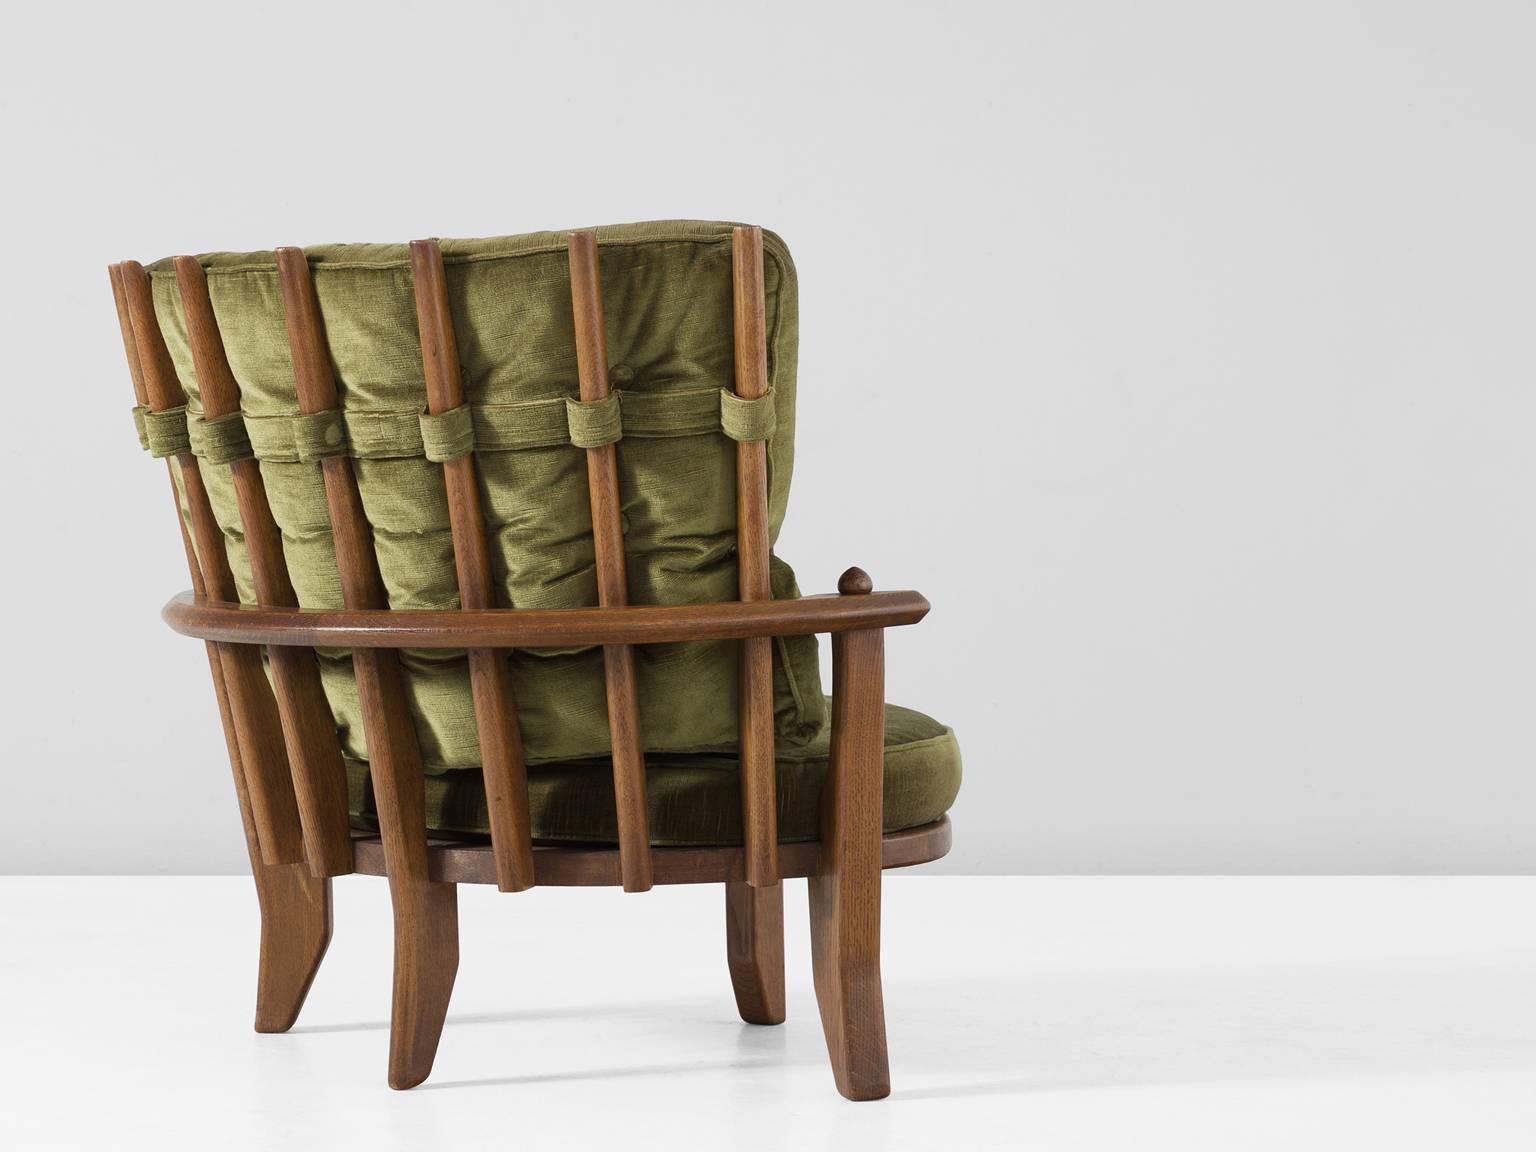 Lounge chair, in fabric and oak, by Guillerme & Chambron, France, 1960s. 

'Eve' armchair in solid oak with the typical characteristic decorative details at the back and capricious forms of the legs. Very comfortable, great statement piece in